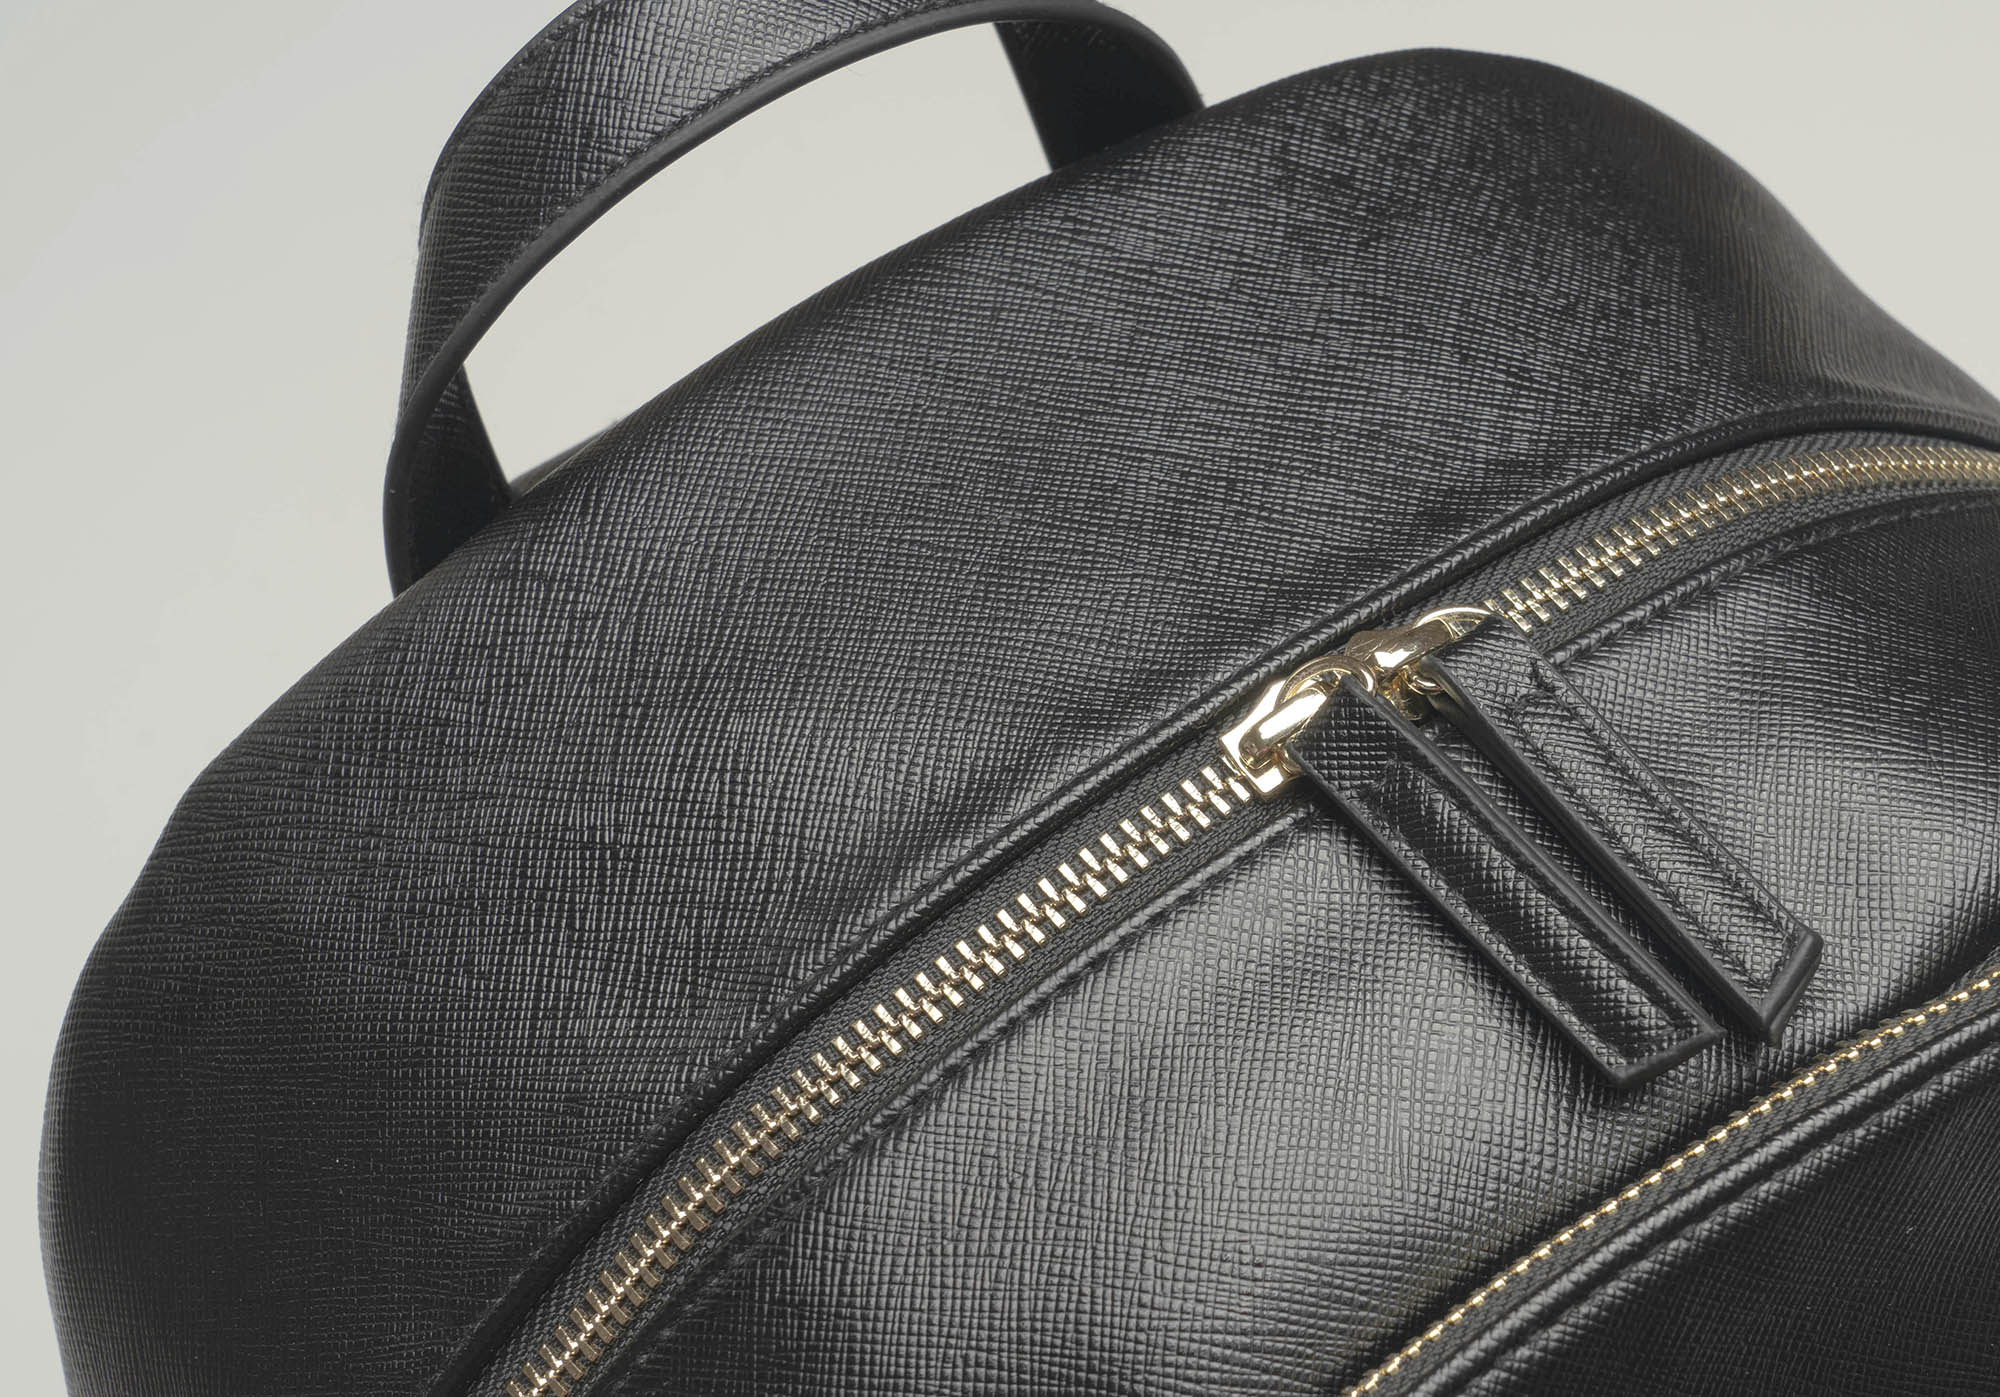 A detailed close-up of the bag's faux leather texture and the metal zipper with double pullers.